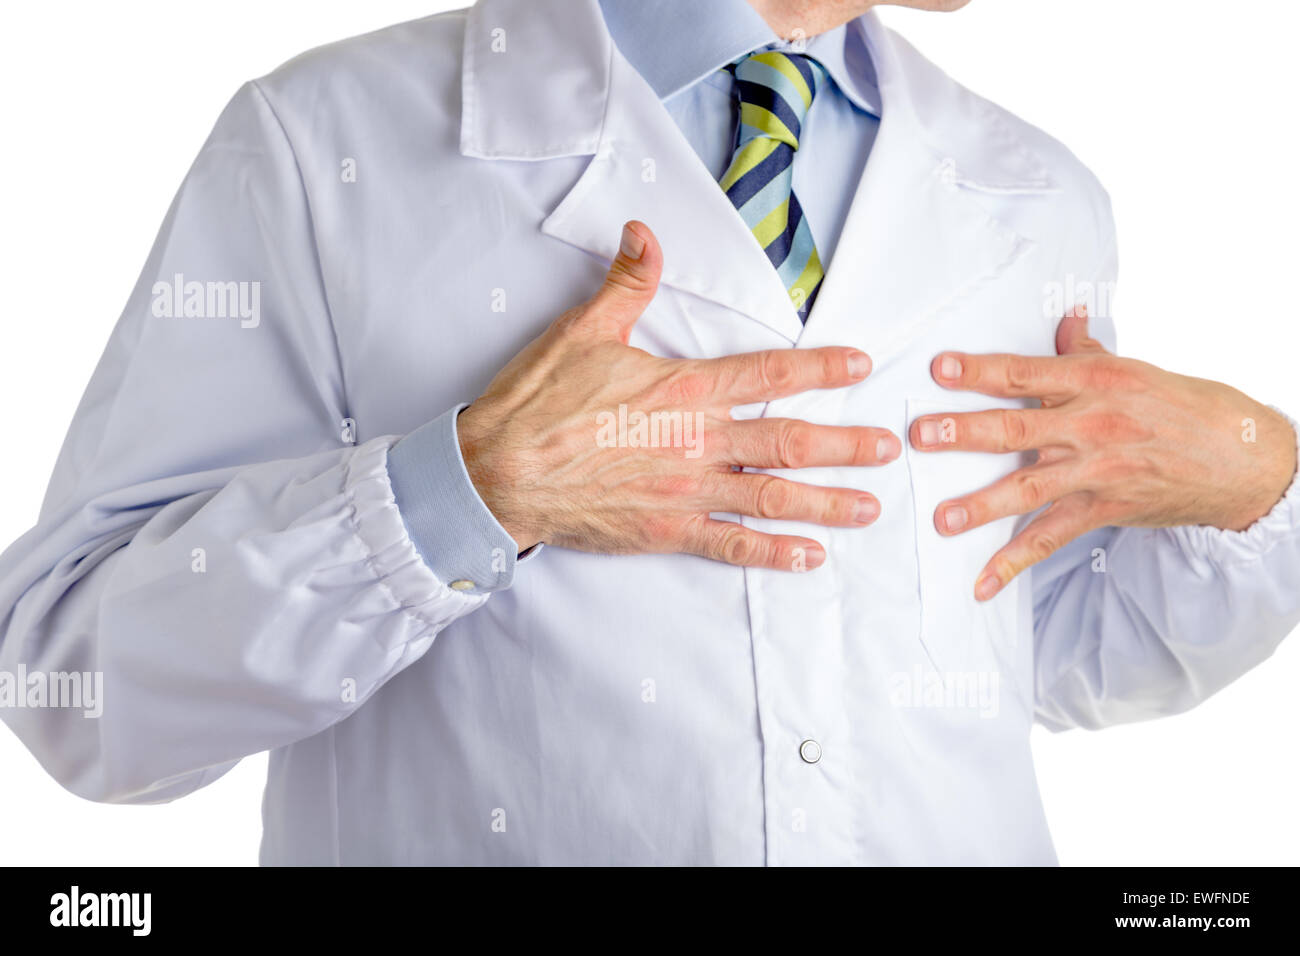 Man dressed with medical white coat, light blue shirt and glossy regimental tie with dark blue, light blue and green stripes, is pointing to his chest with both hands, driving attention to his heart Stock Photo